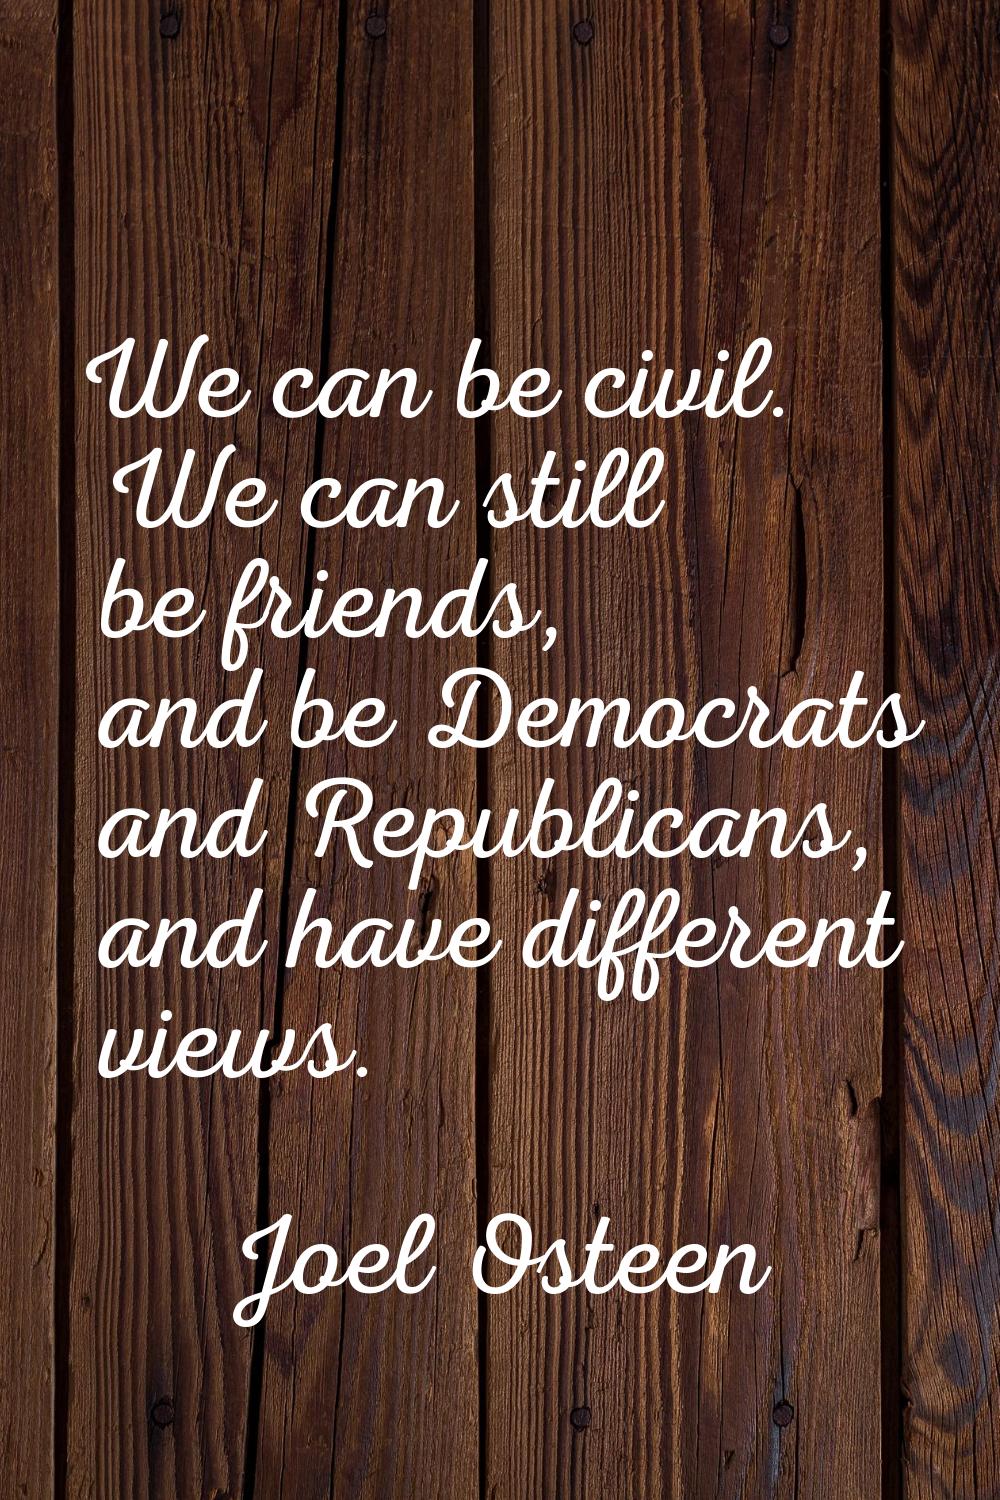 We can be civil. We can still be friends, and be Democrats and Republicans, and have different view